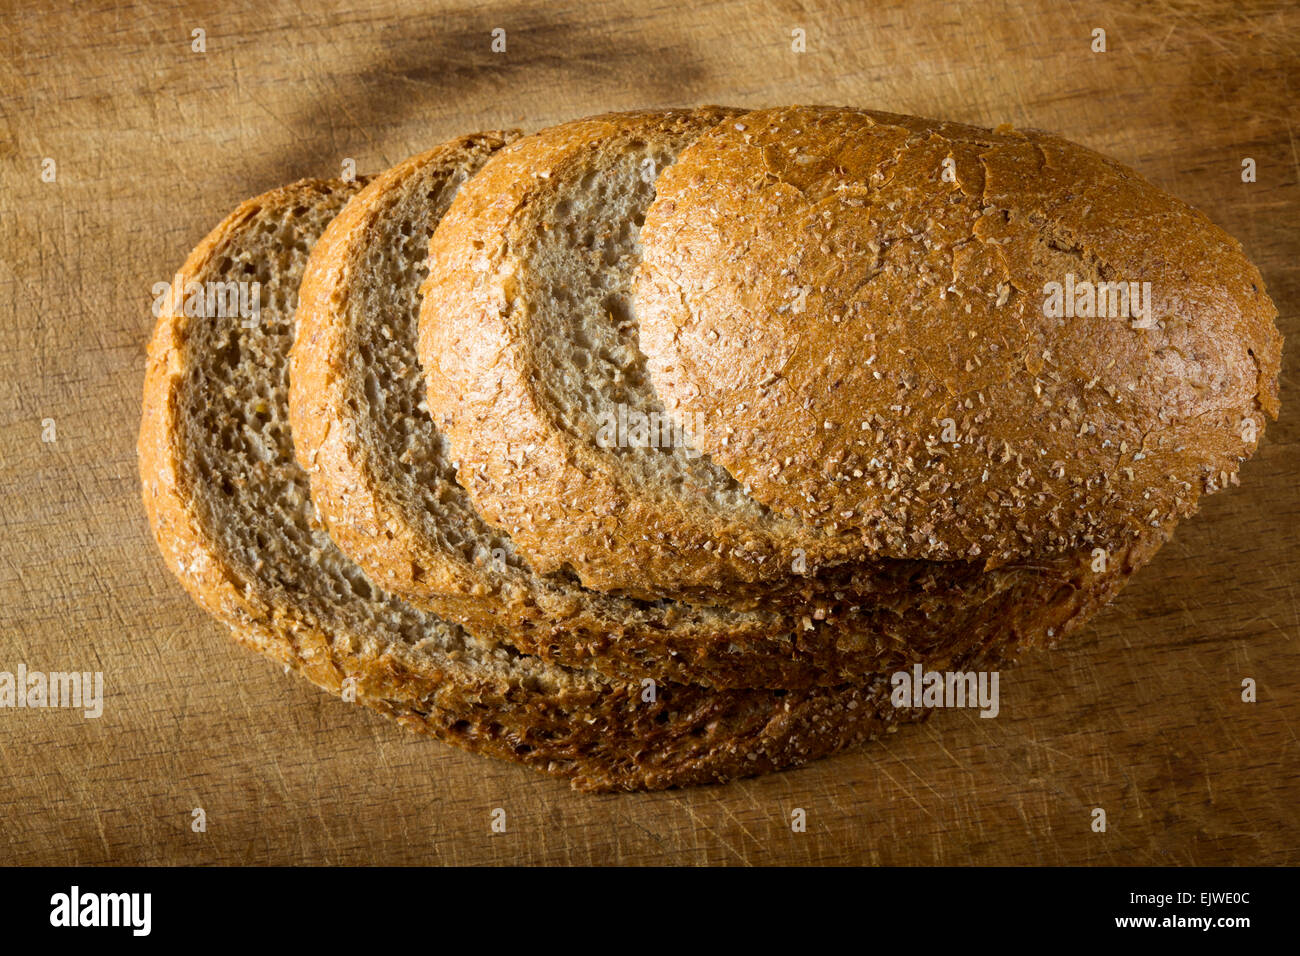 Rustic loaf. Shallow DoF, focus on the bread slices Stock Photo